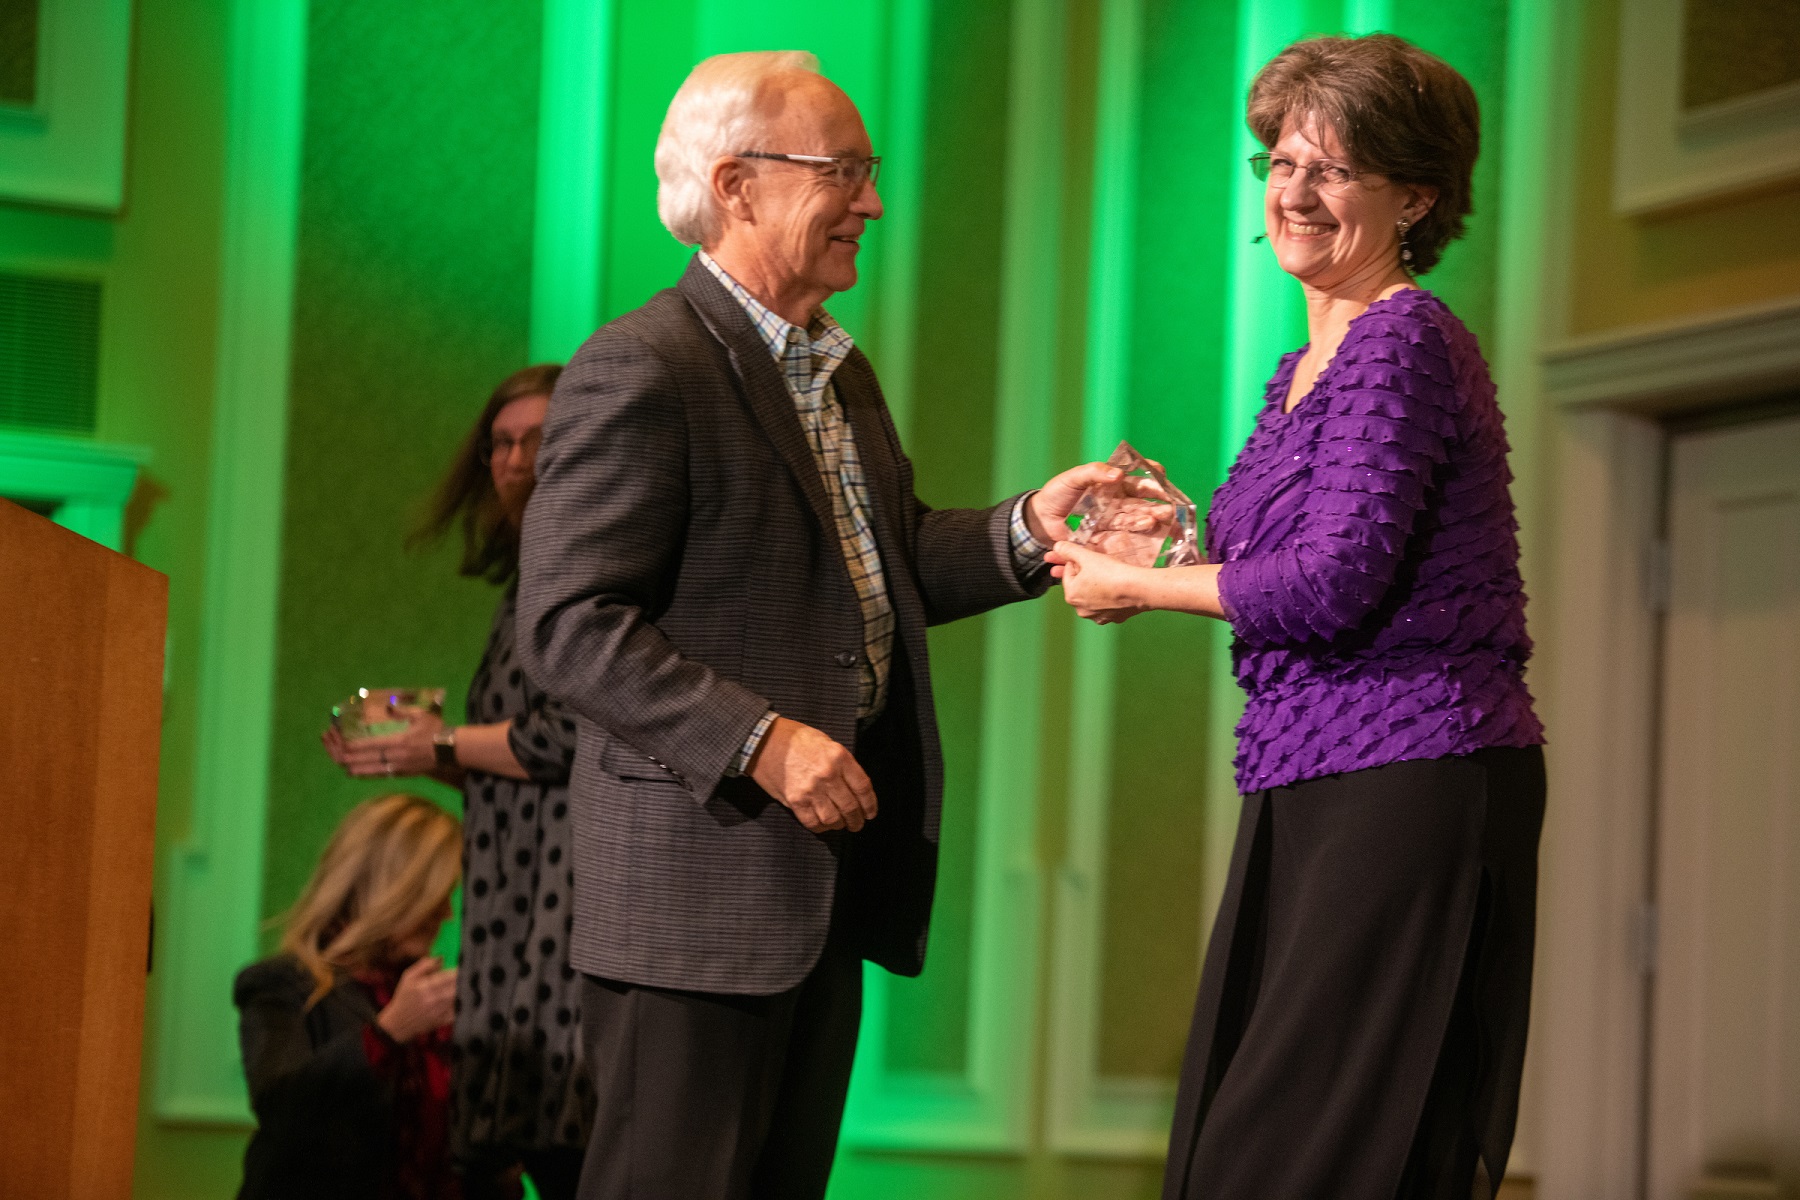 Teaching and Research Awards ceremony honors outstanding OHIO faculty